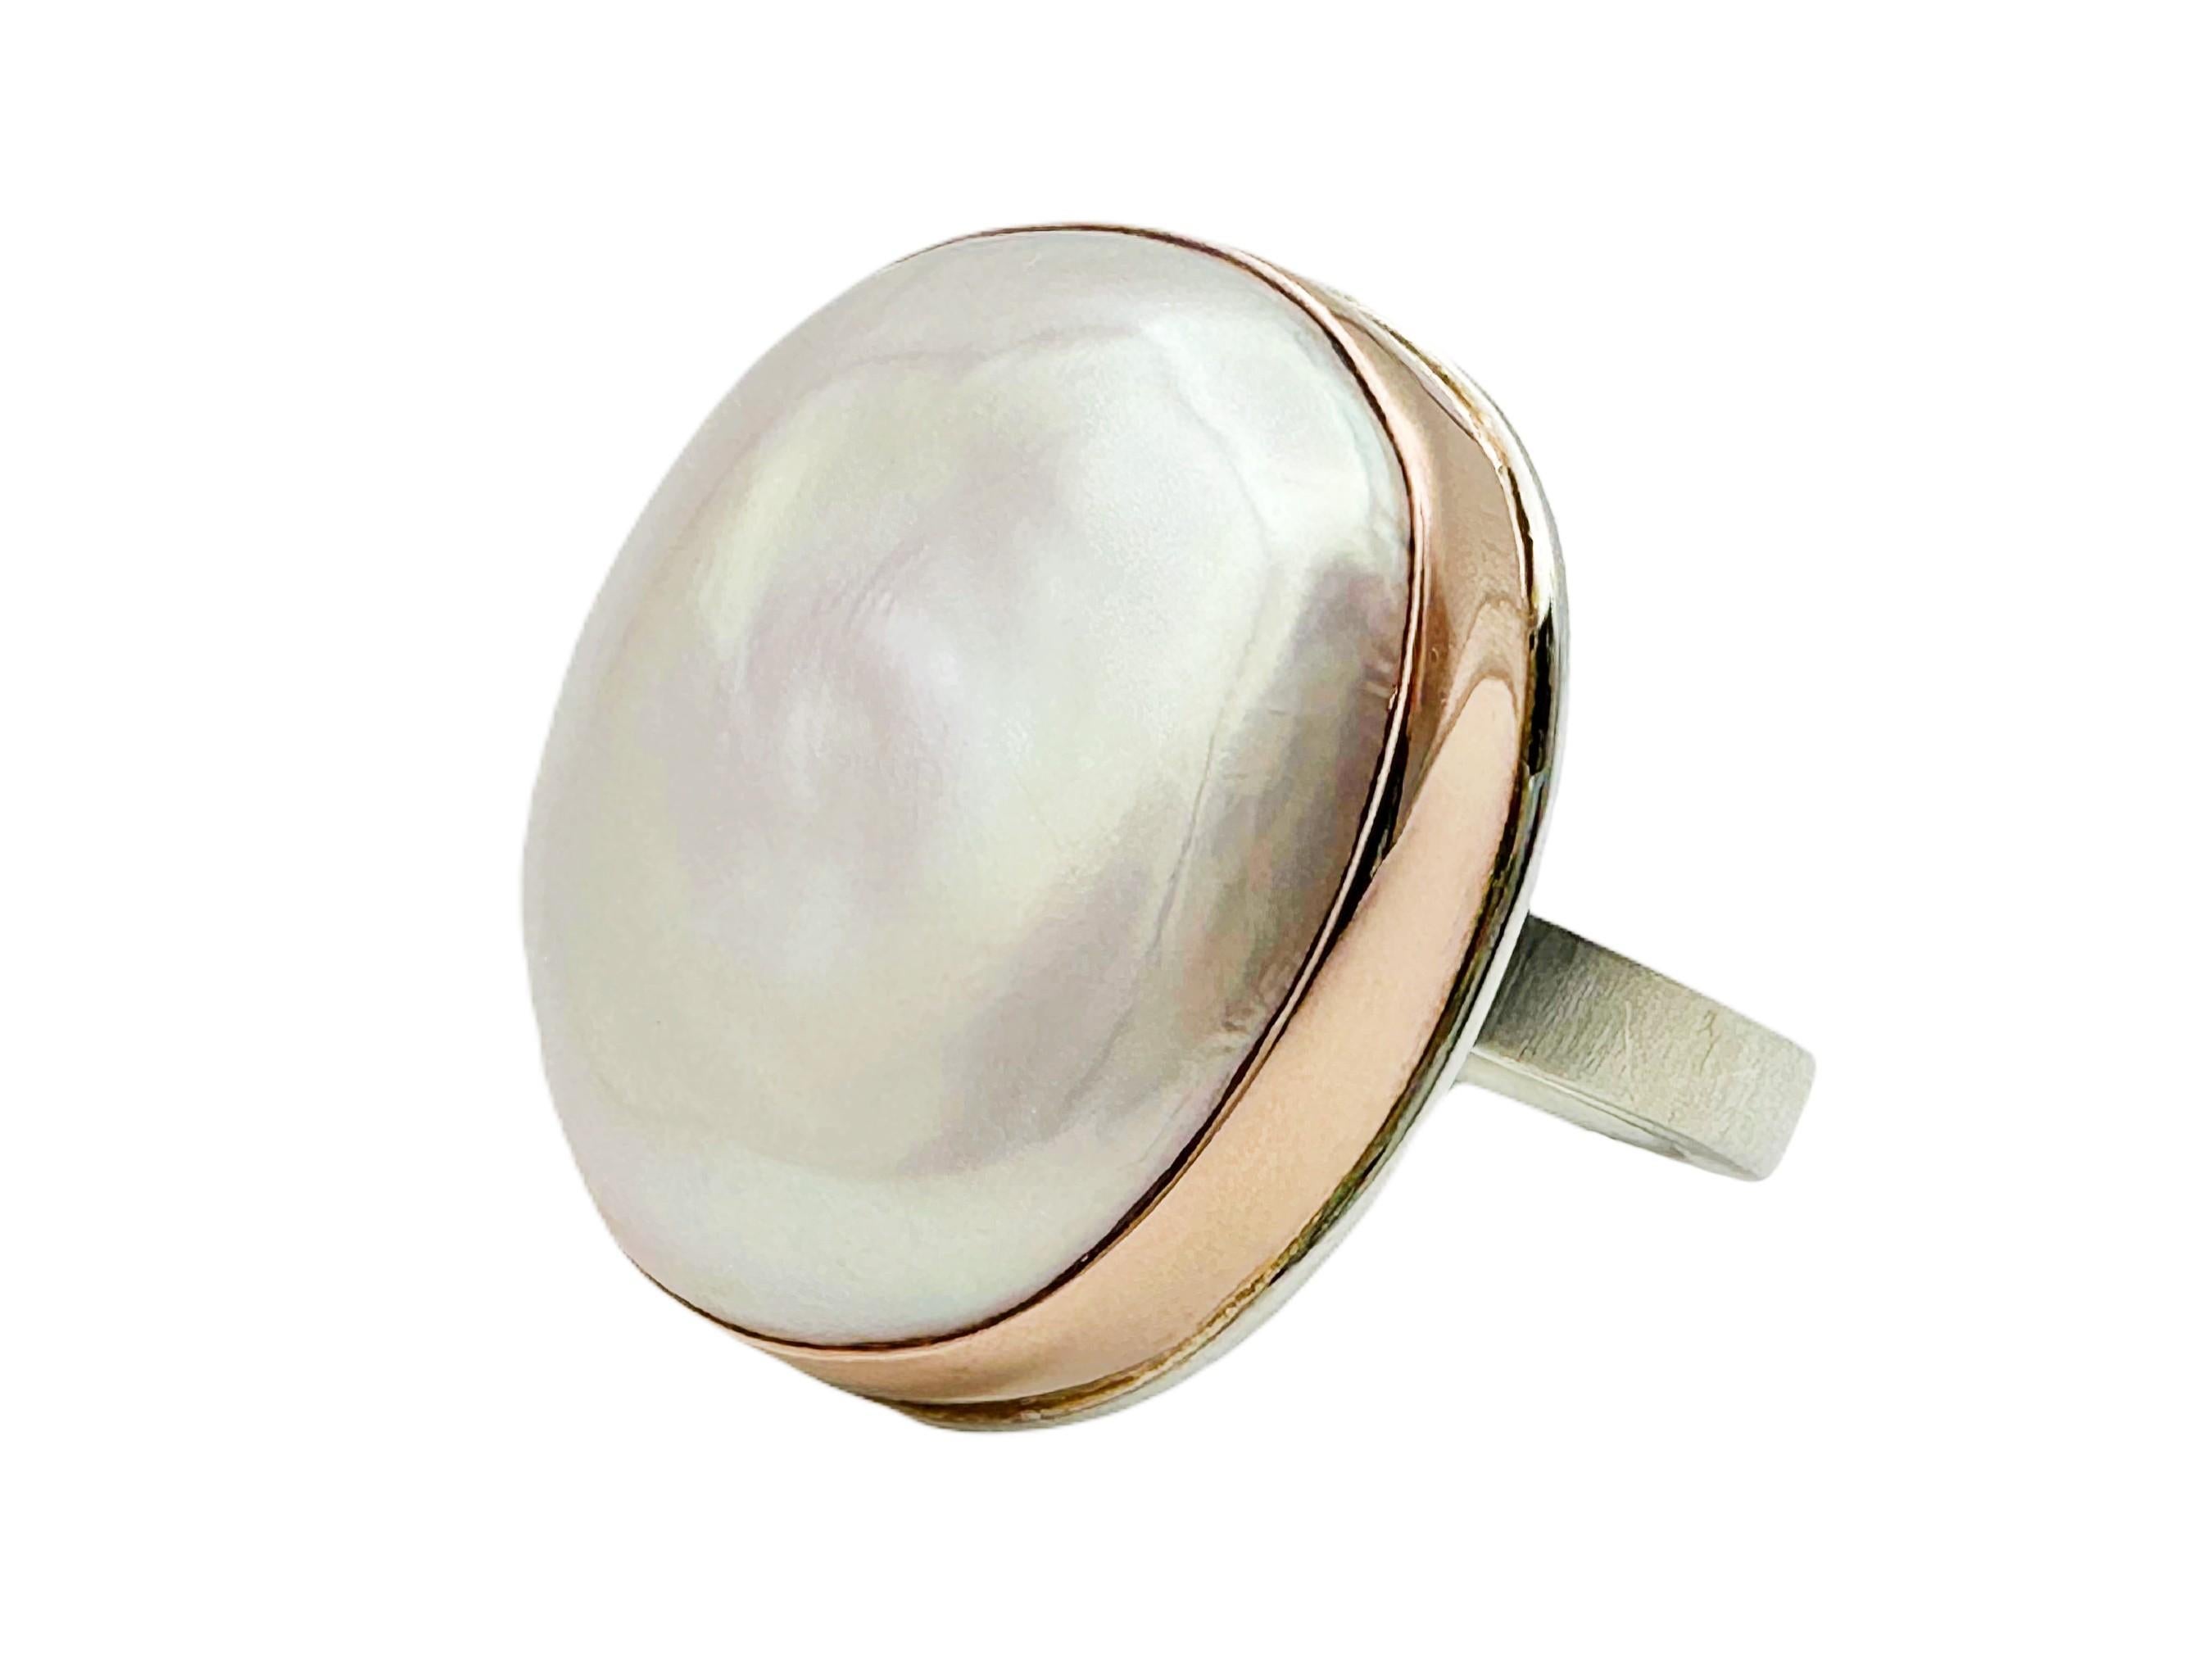 Artisan Jamie Joseph Pink Pearl 14K Rose Gold Sterling Silver Statement Ring Size 6.75 For Sale